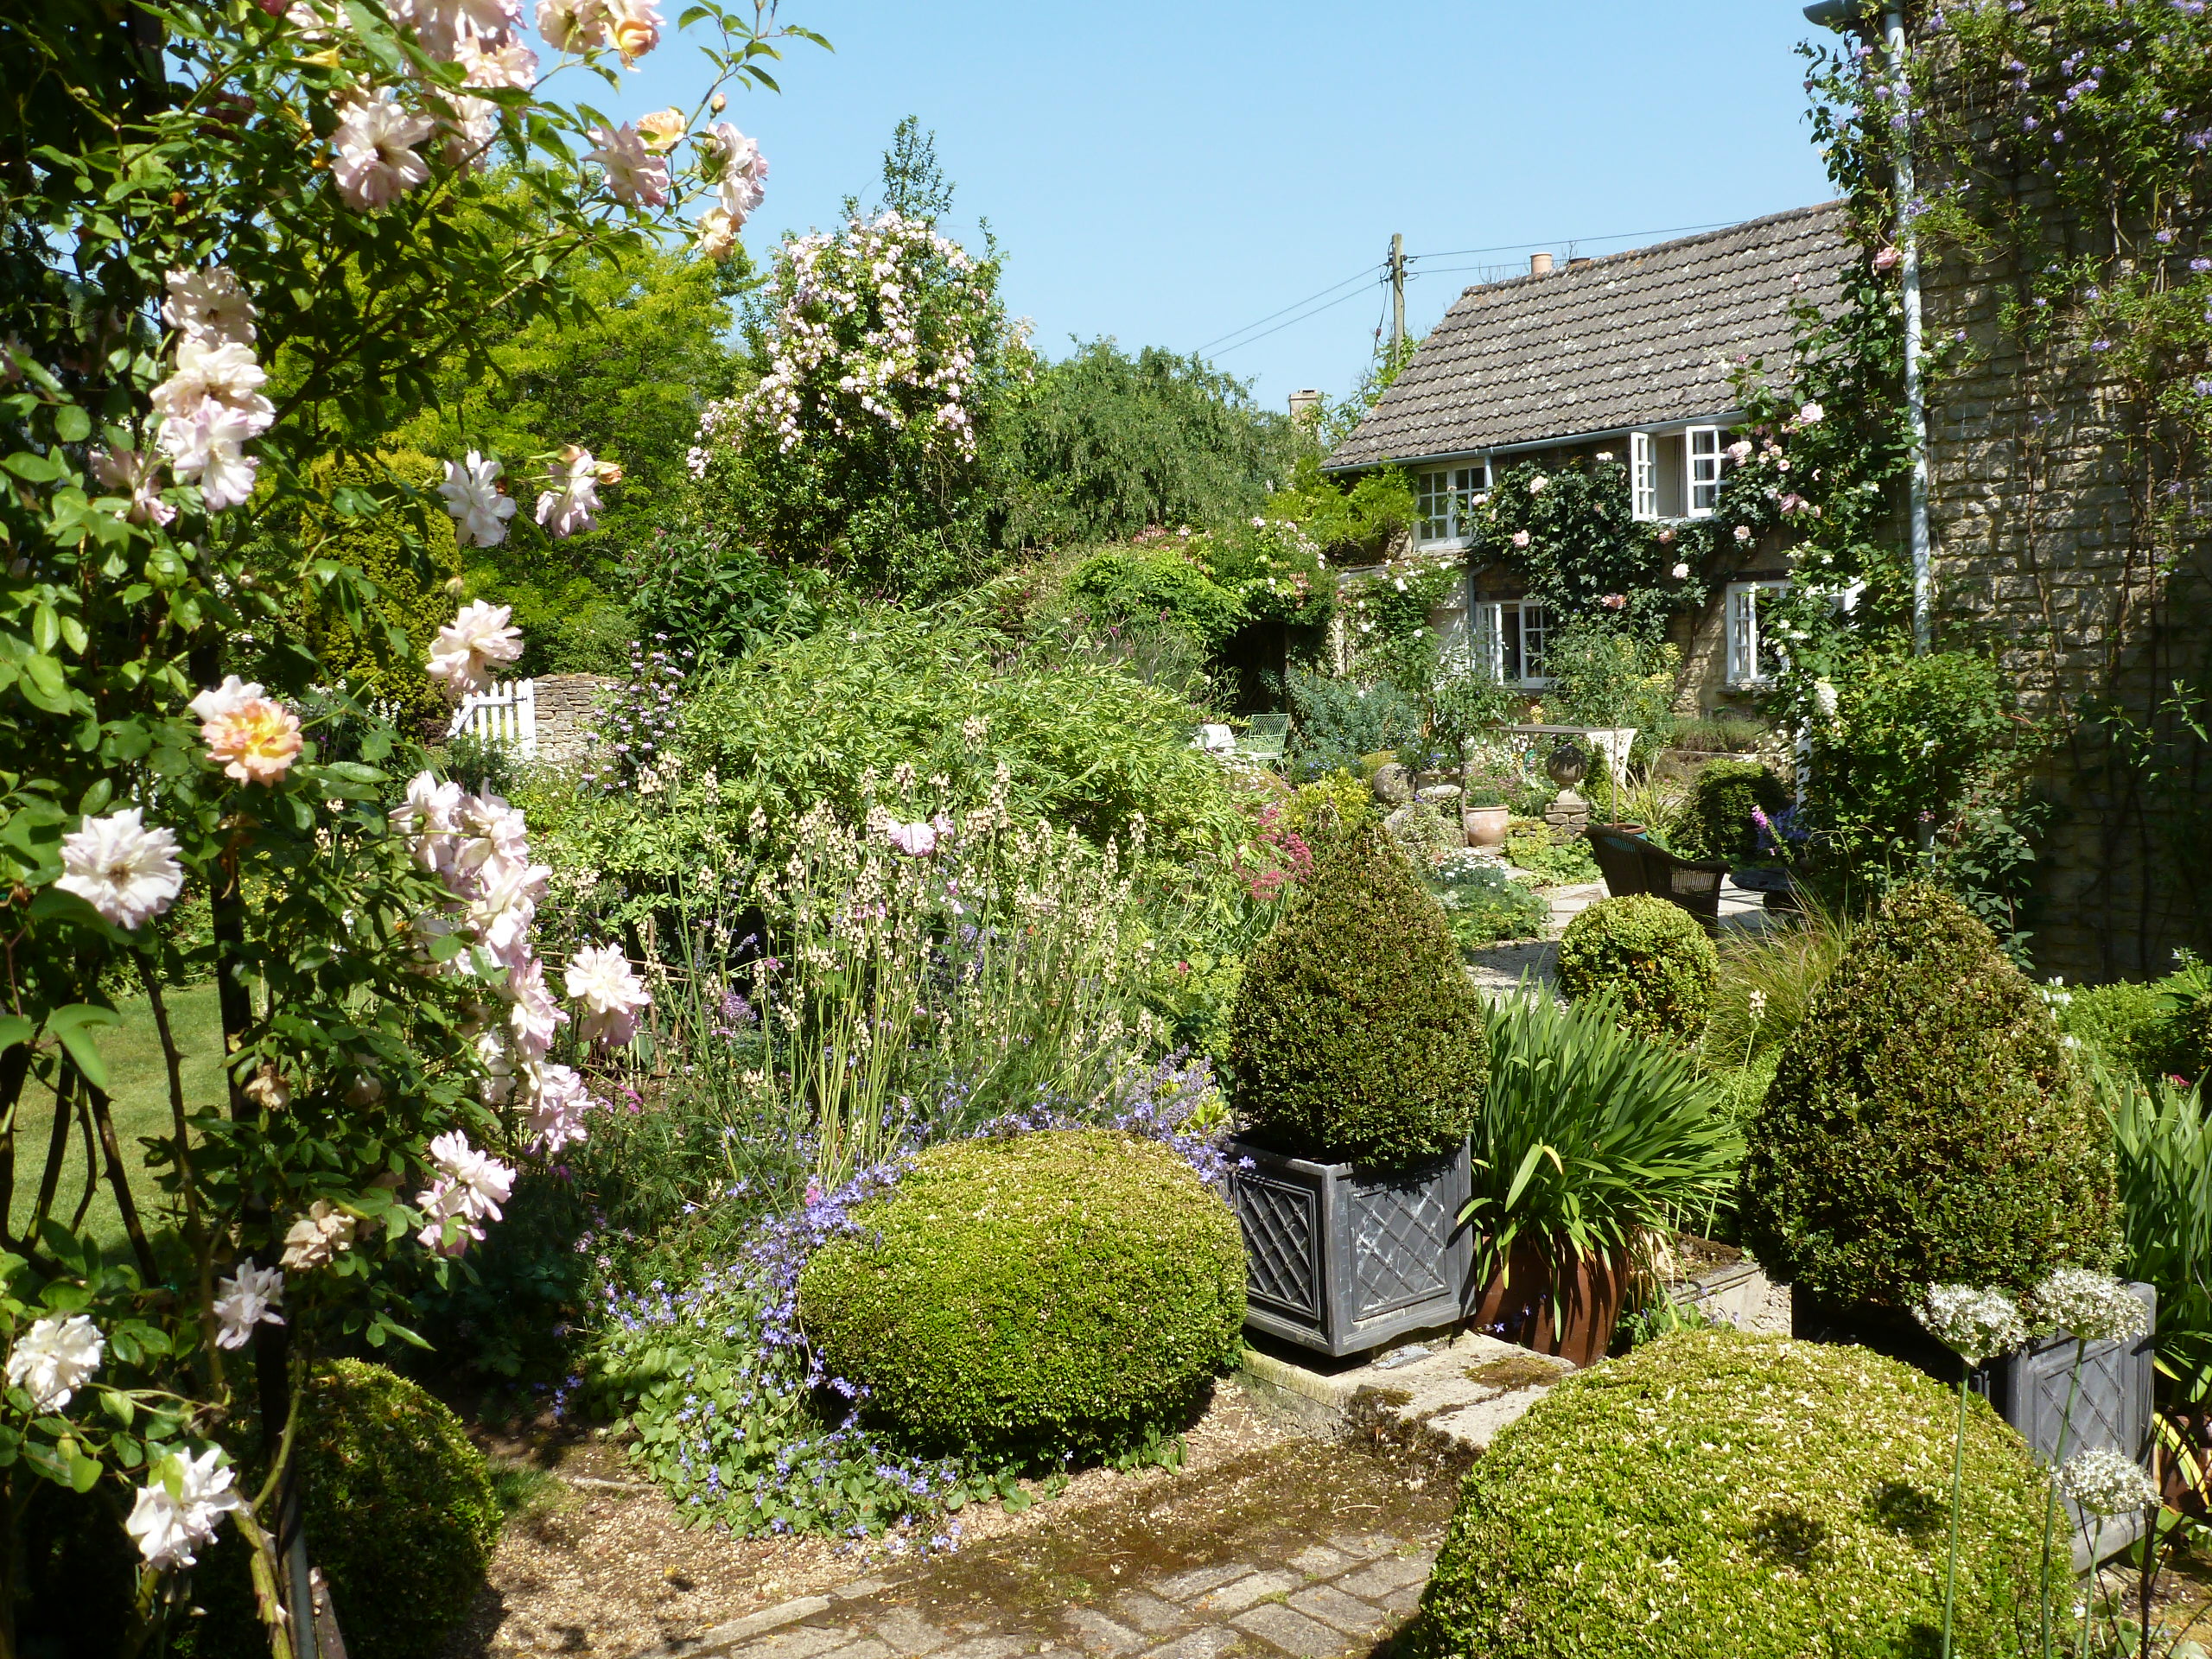 The wonderful gardens at Bullocks Horn Cottage - as featured in Magazines